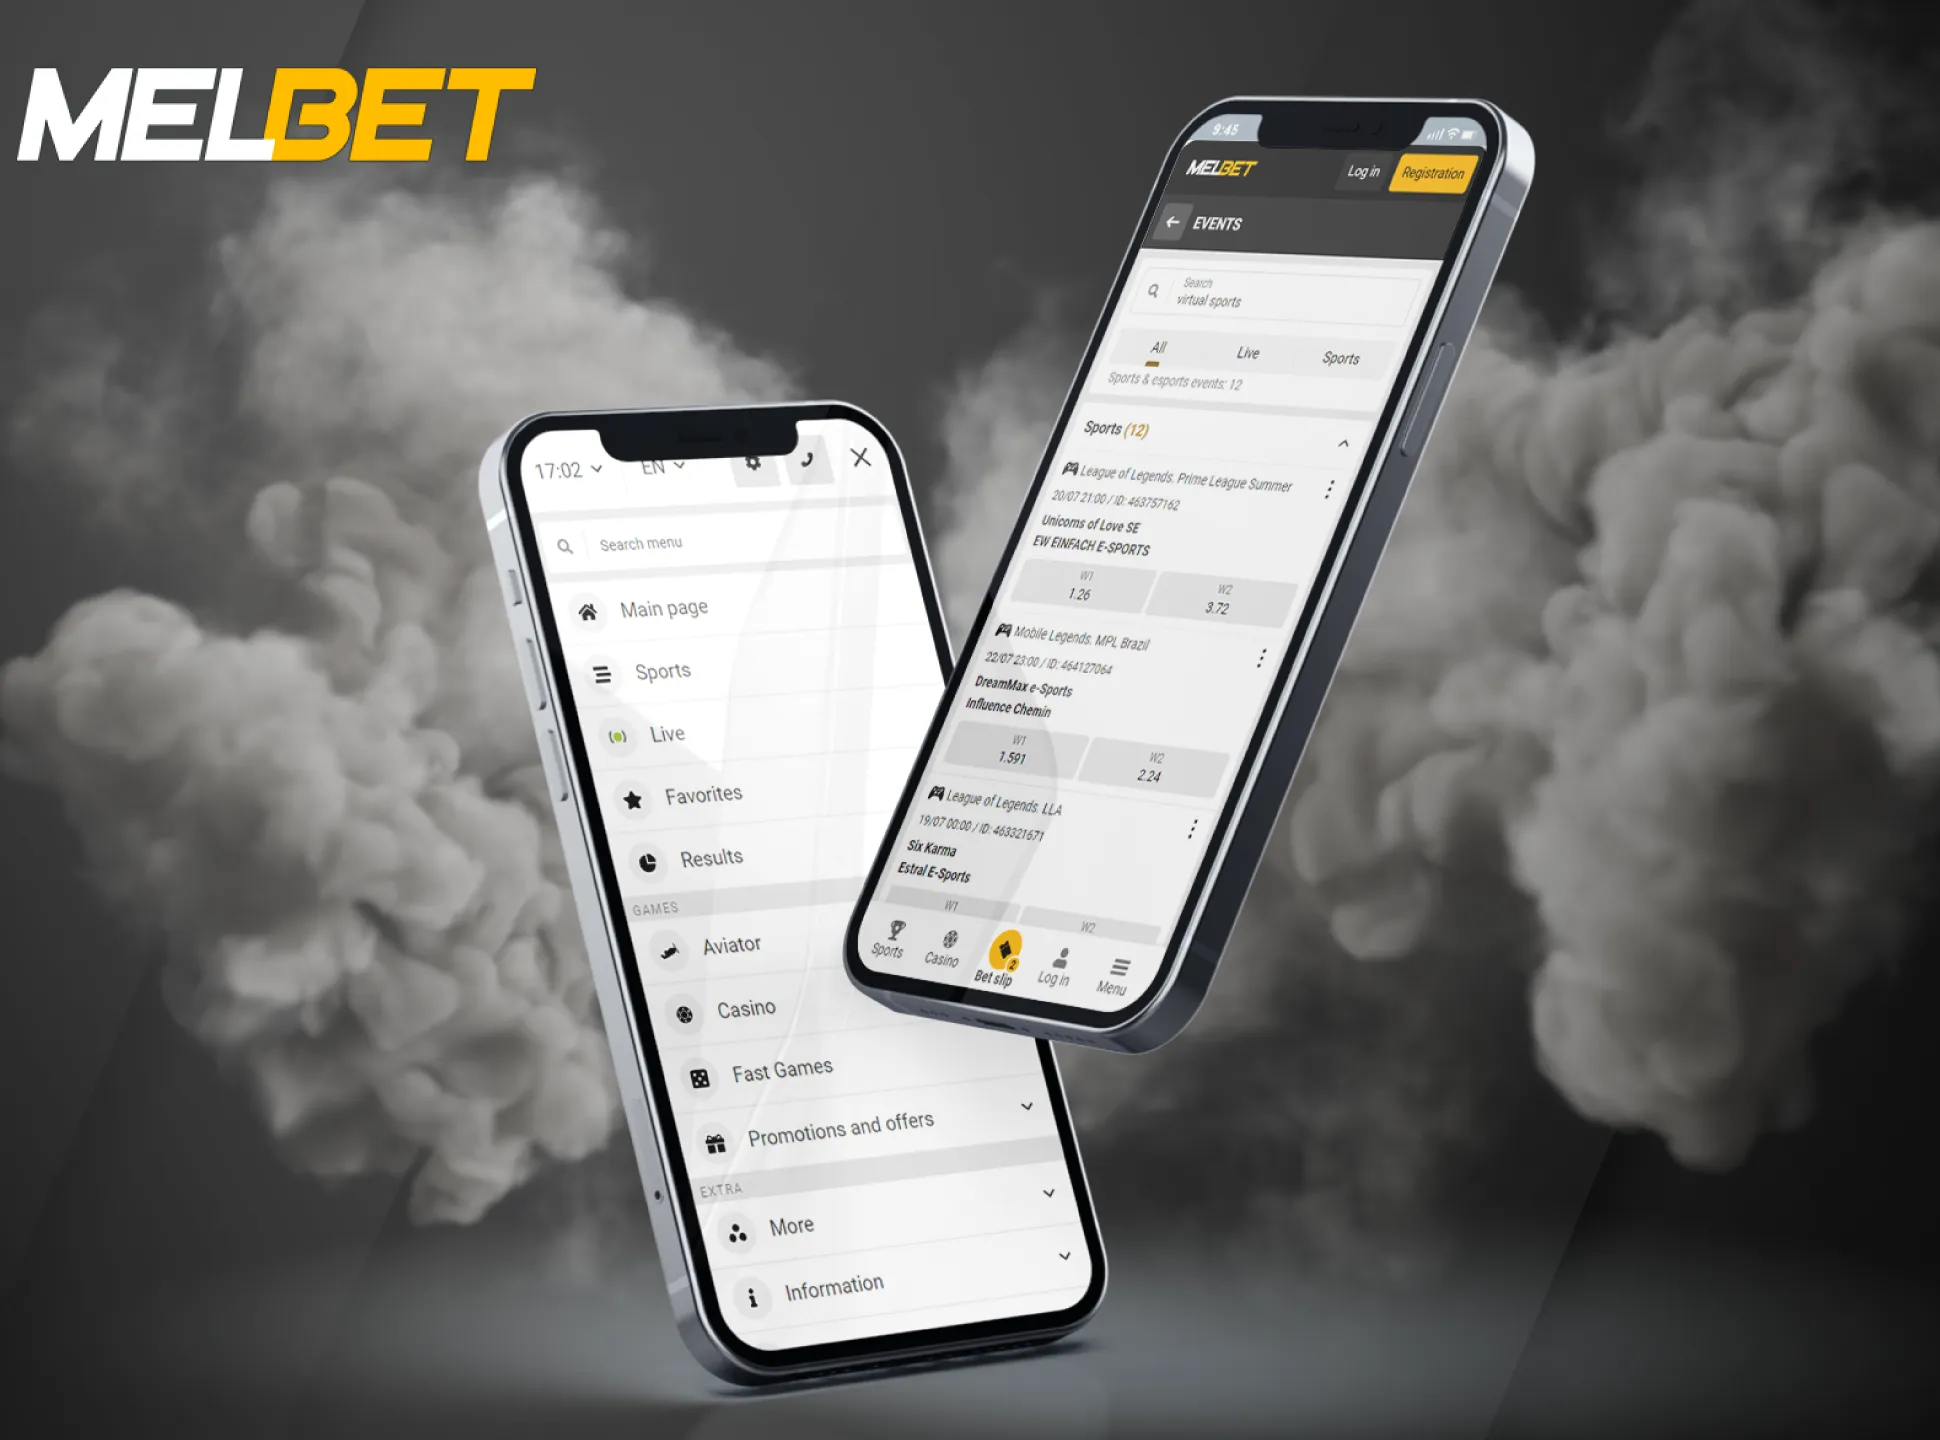 You can place bets whenever you want with the Melbet mobile app.